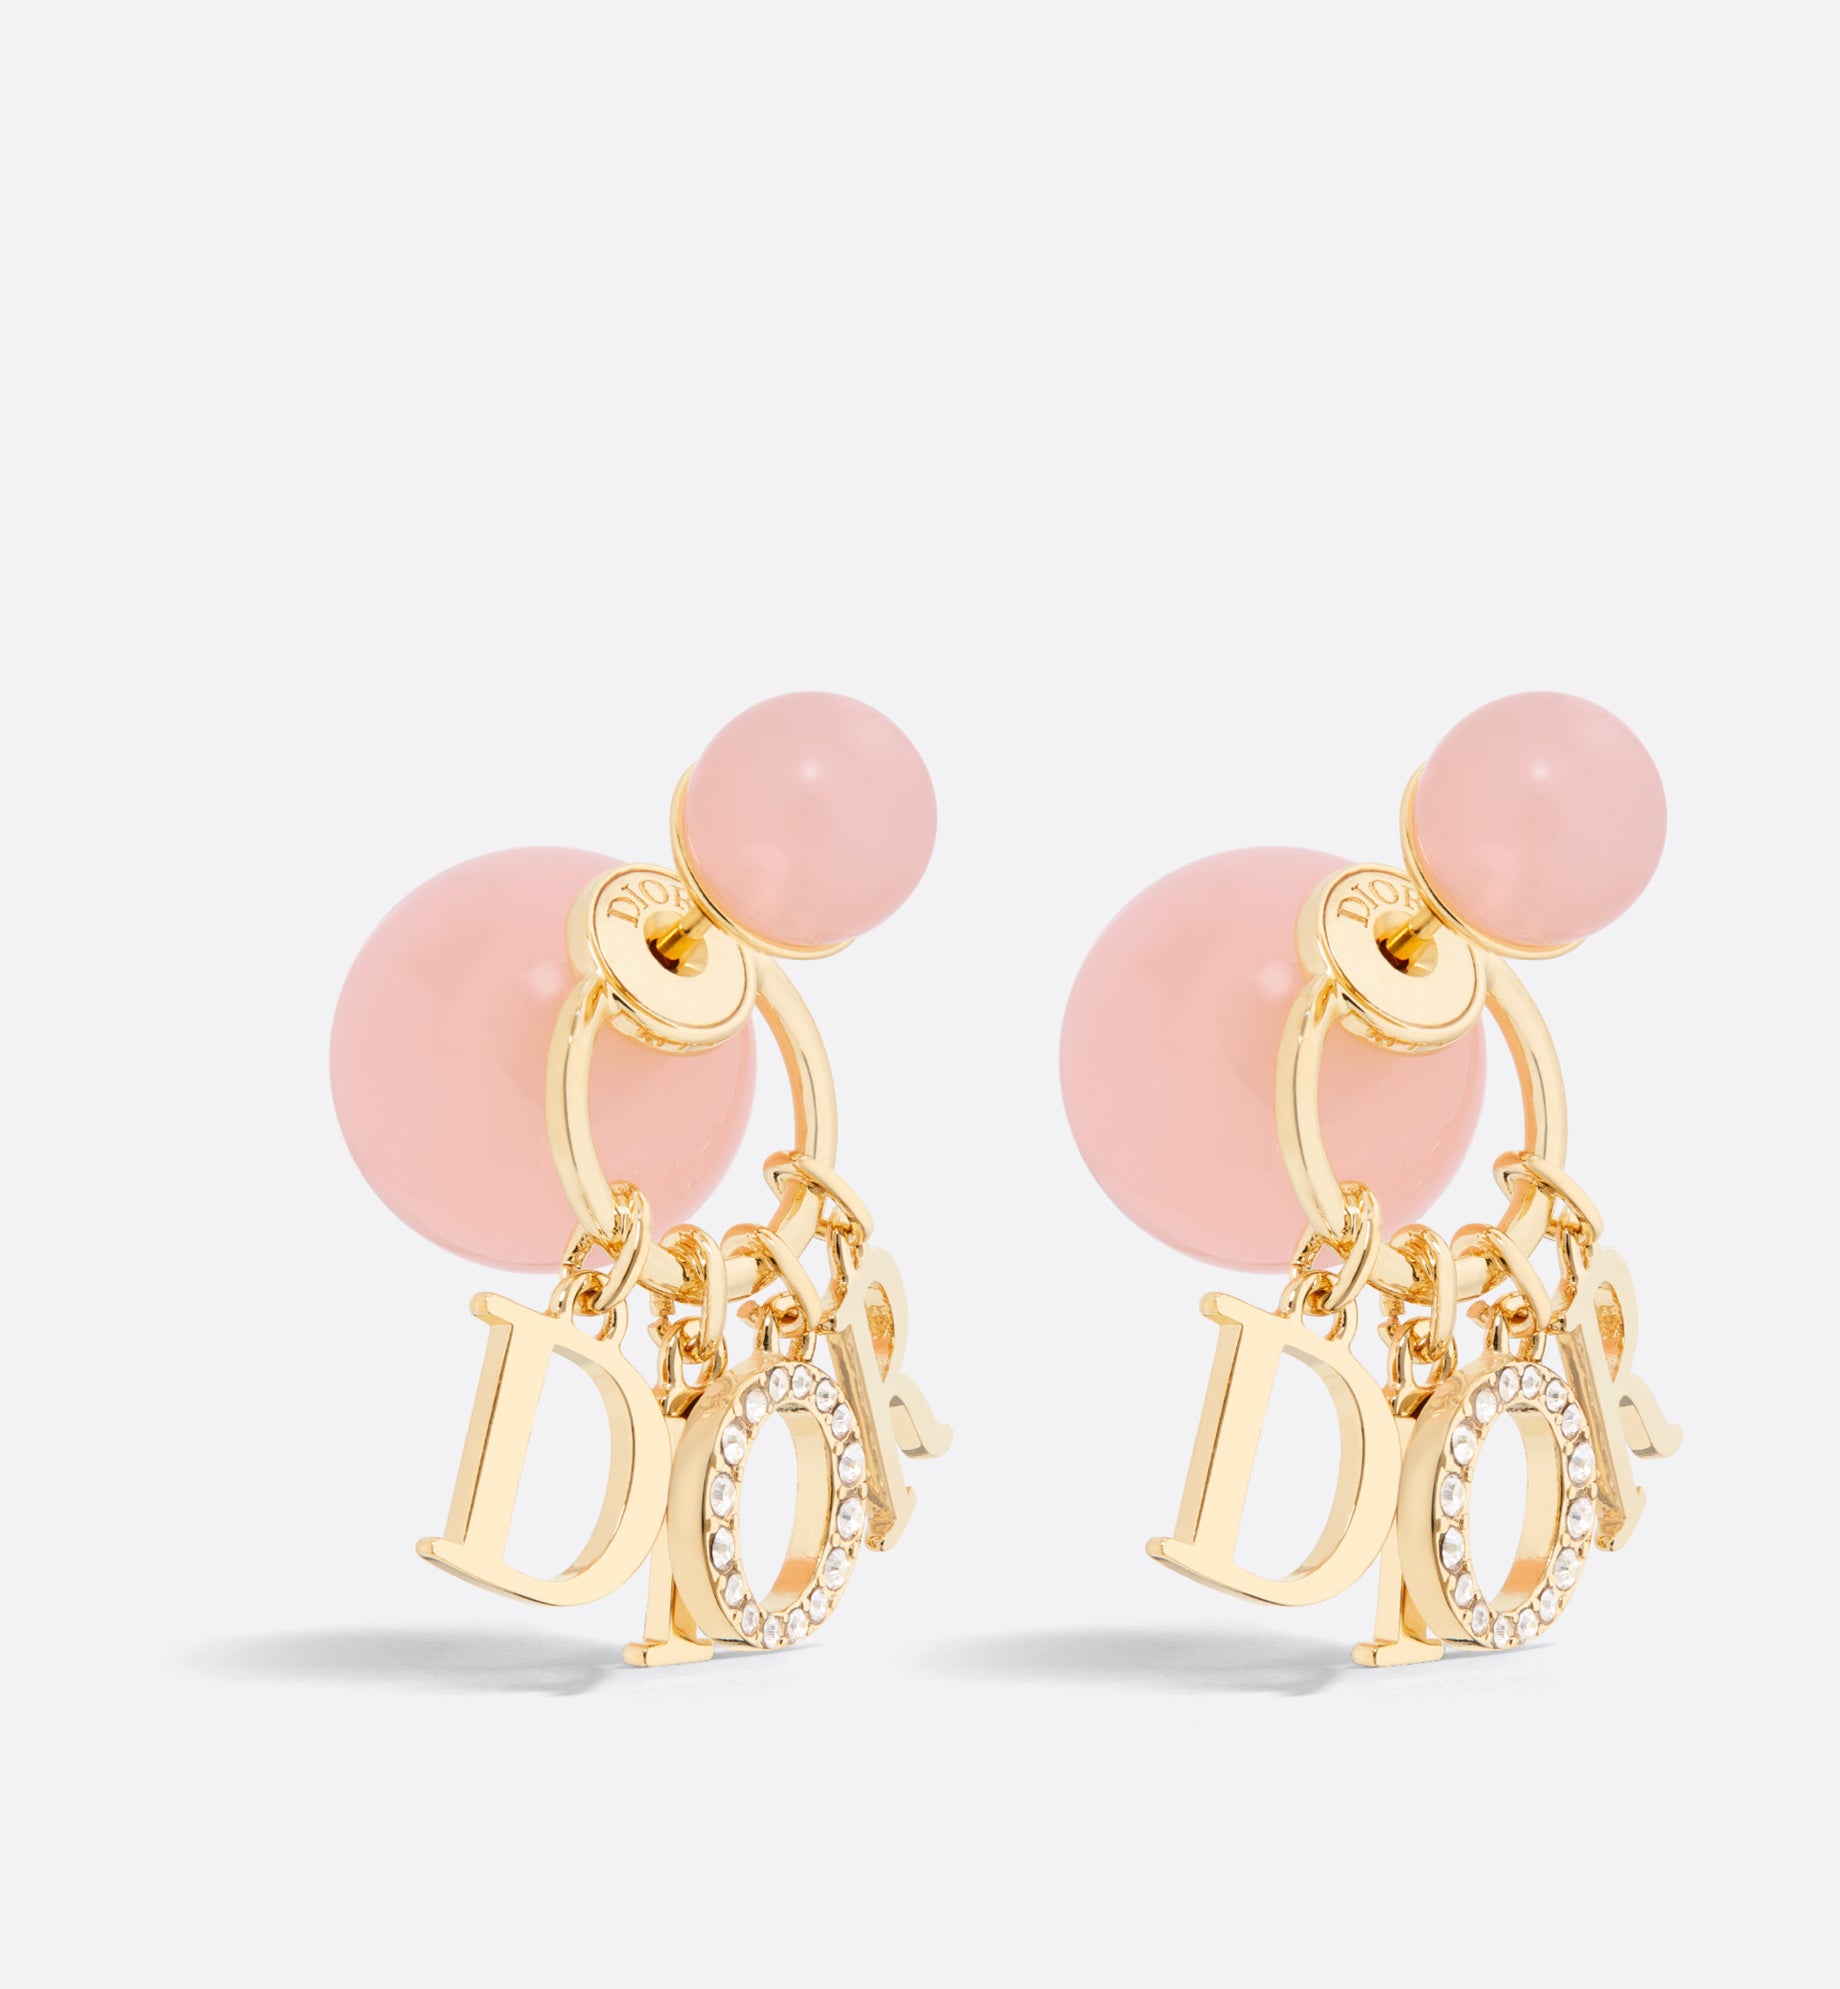 Dior Tribales Earrings • Gold-Finish Metal with Orange Acid Resin Pearls and White Crystals